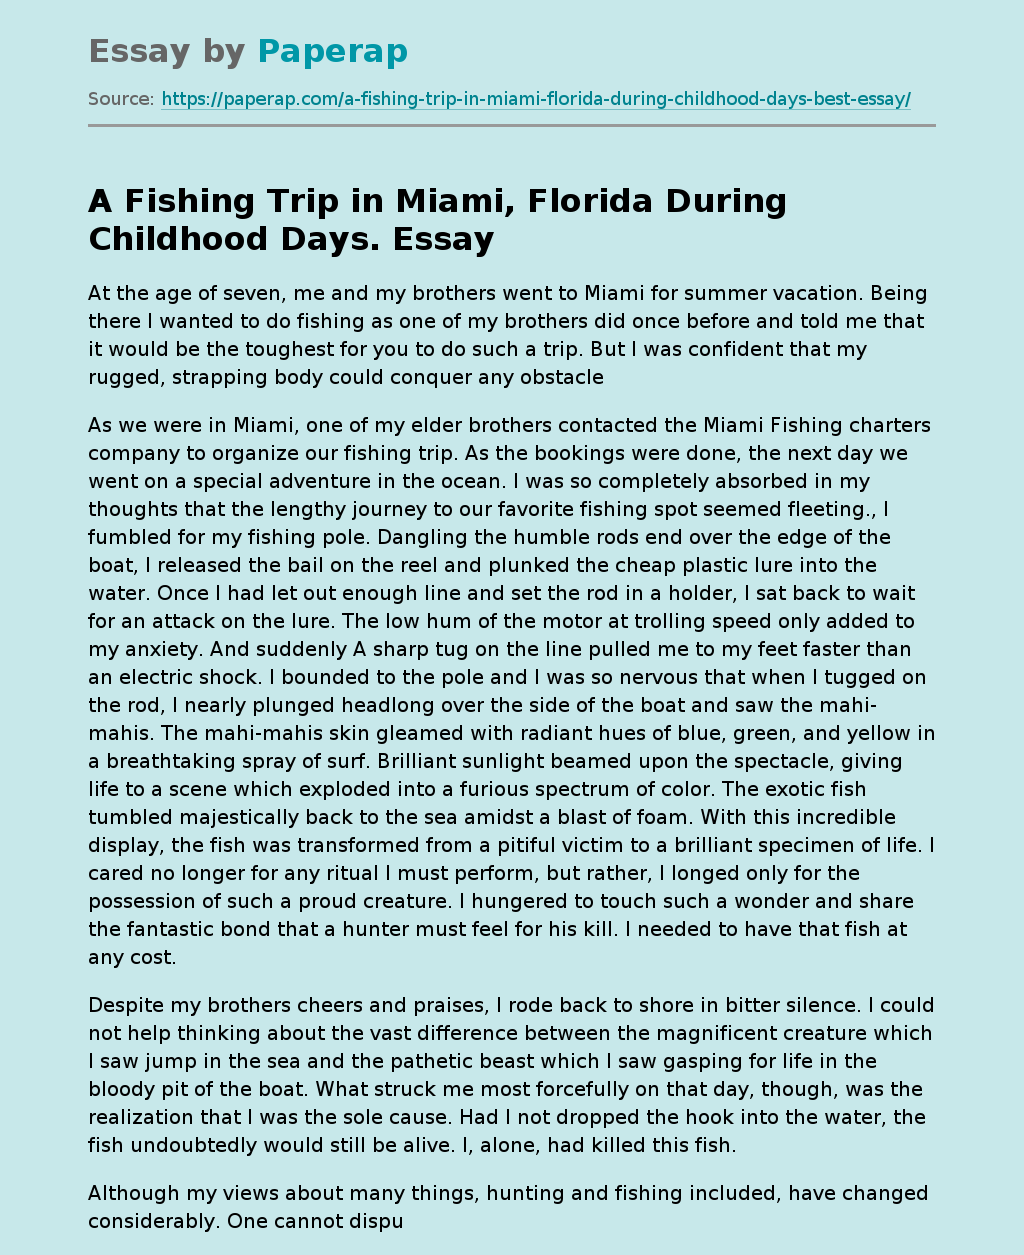 A Fishing Trip in Miami, Florida During Childhood Days